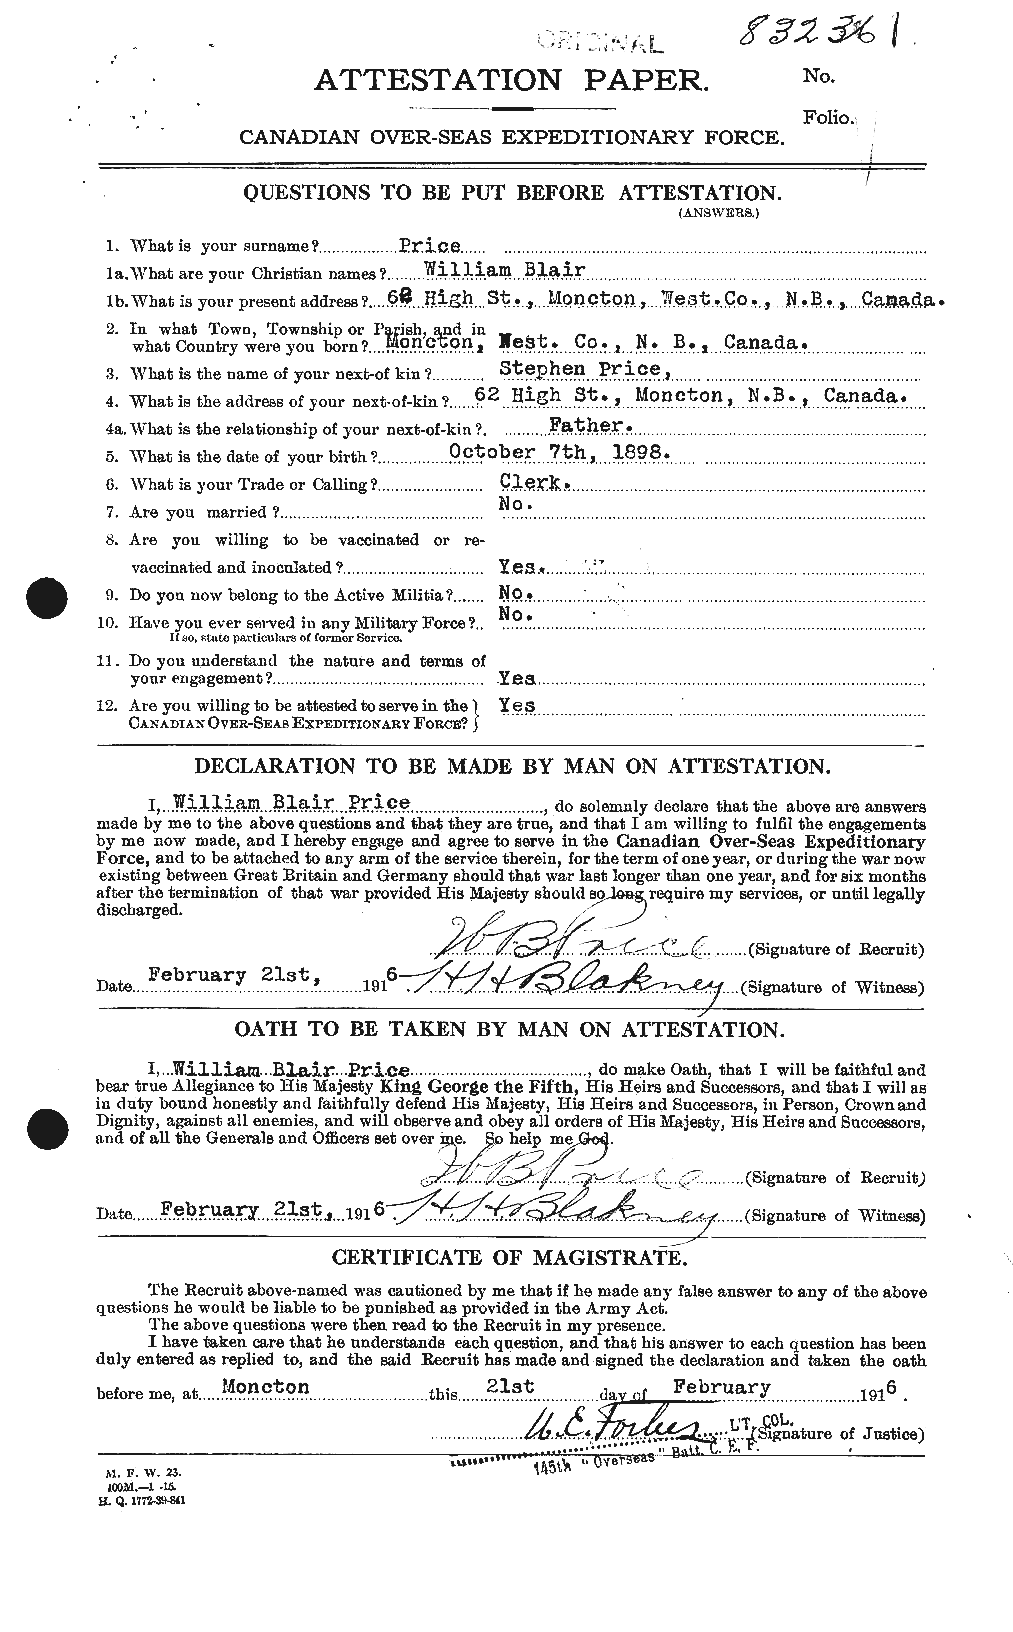 Personnel Records of the First World War - CEF 587430a